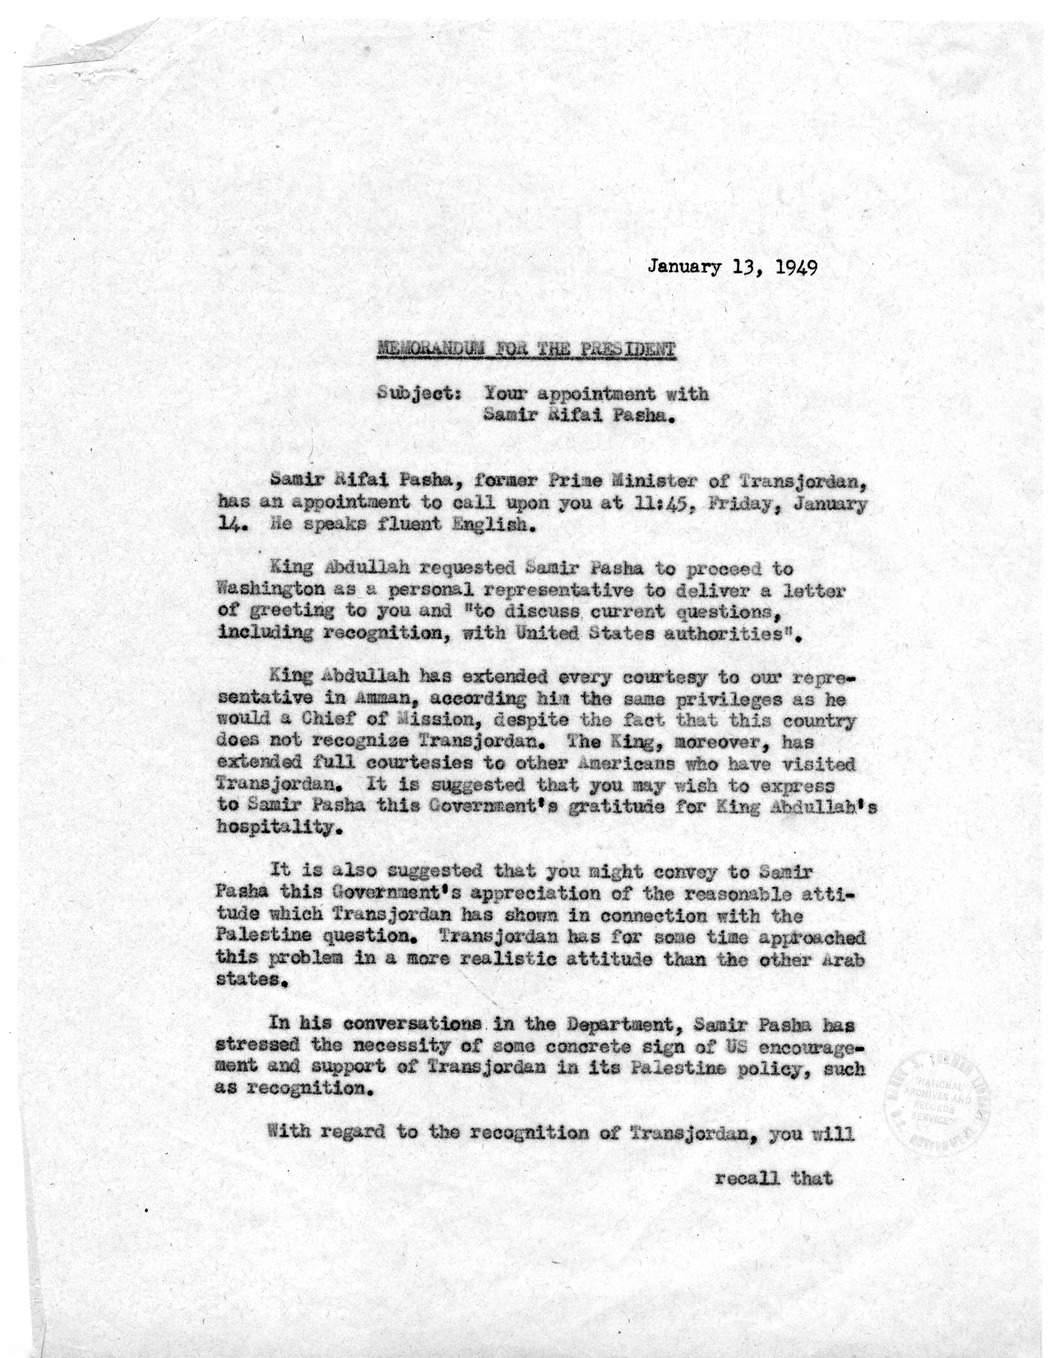 Correspondence Betweeen Secretary of Defense James Forrestal and President Harry S. Truman, with Attachments and Related Material